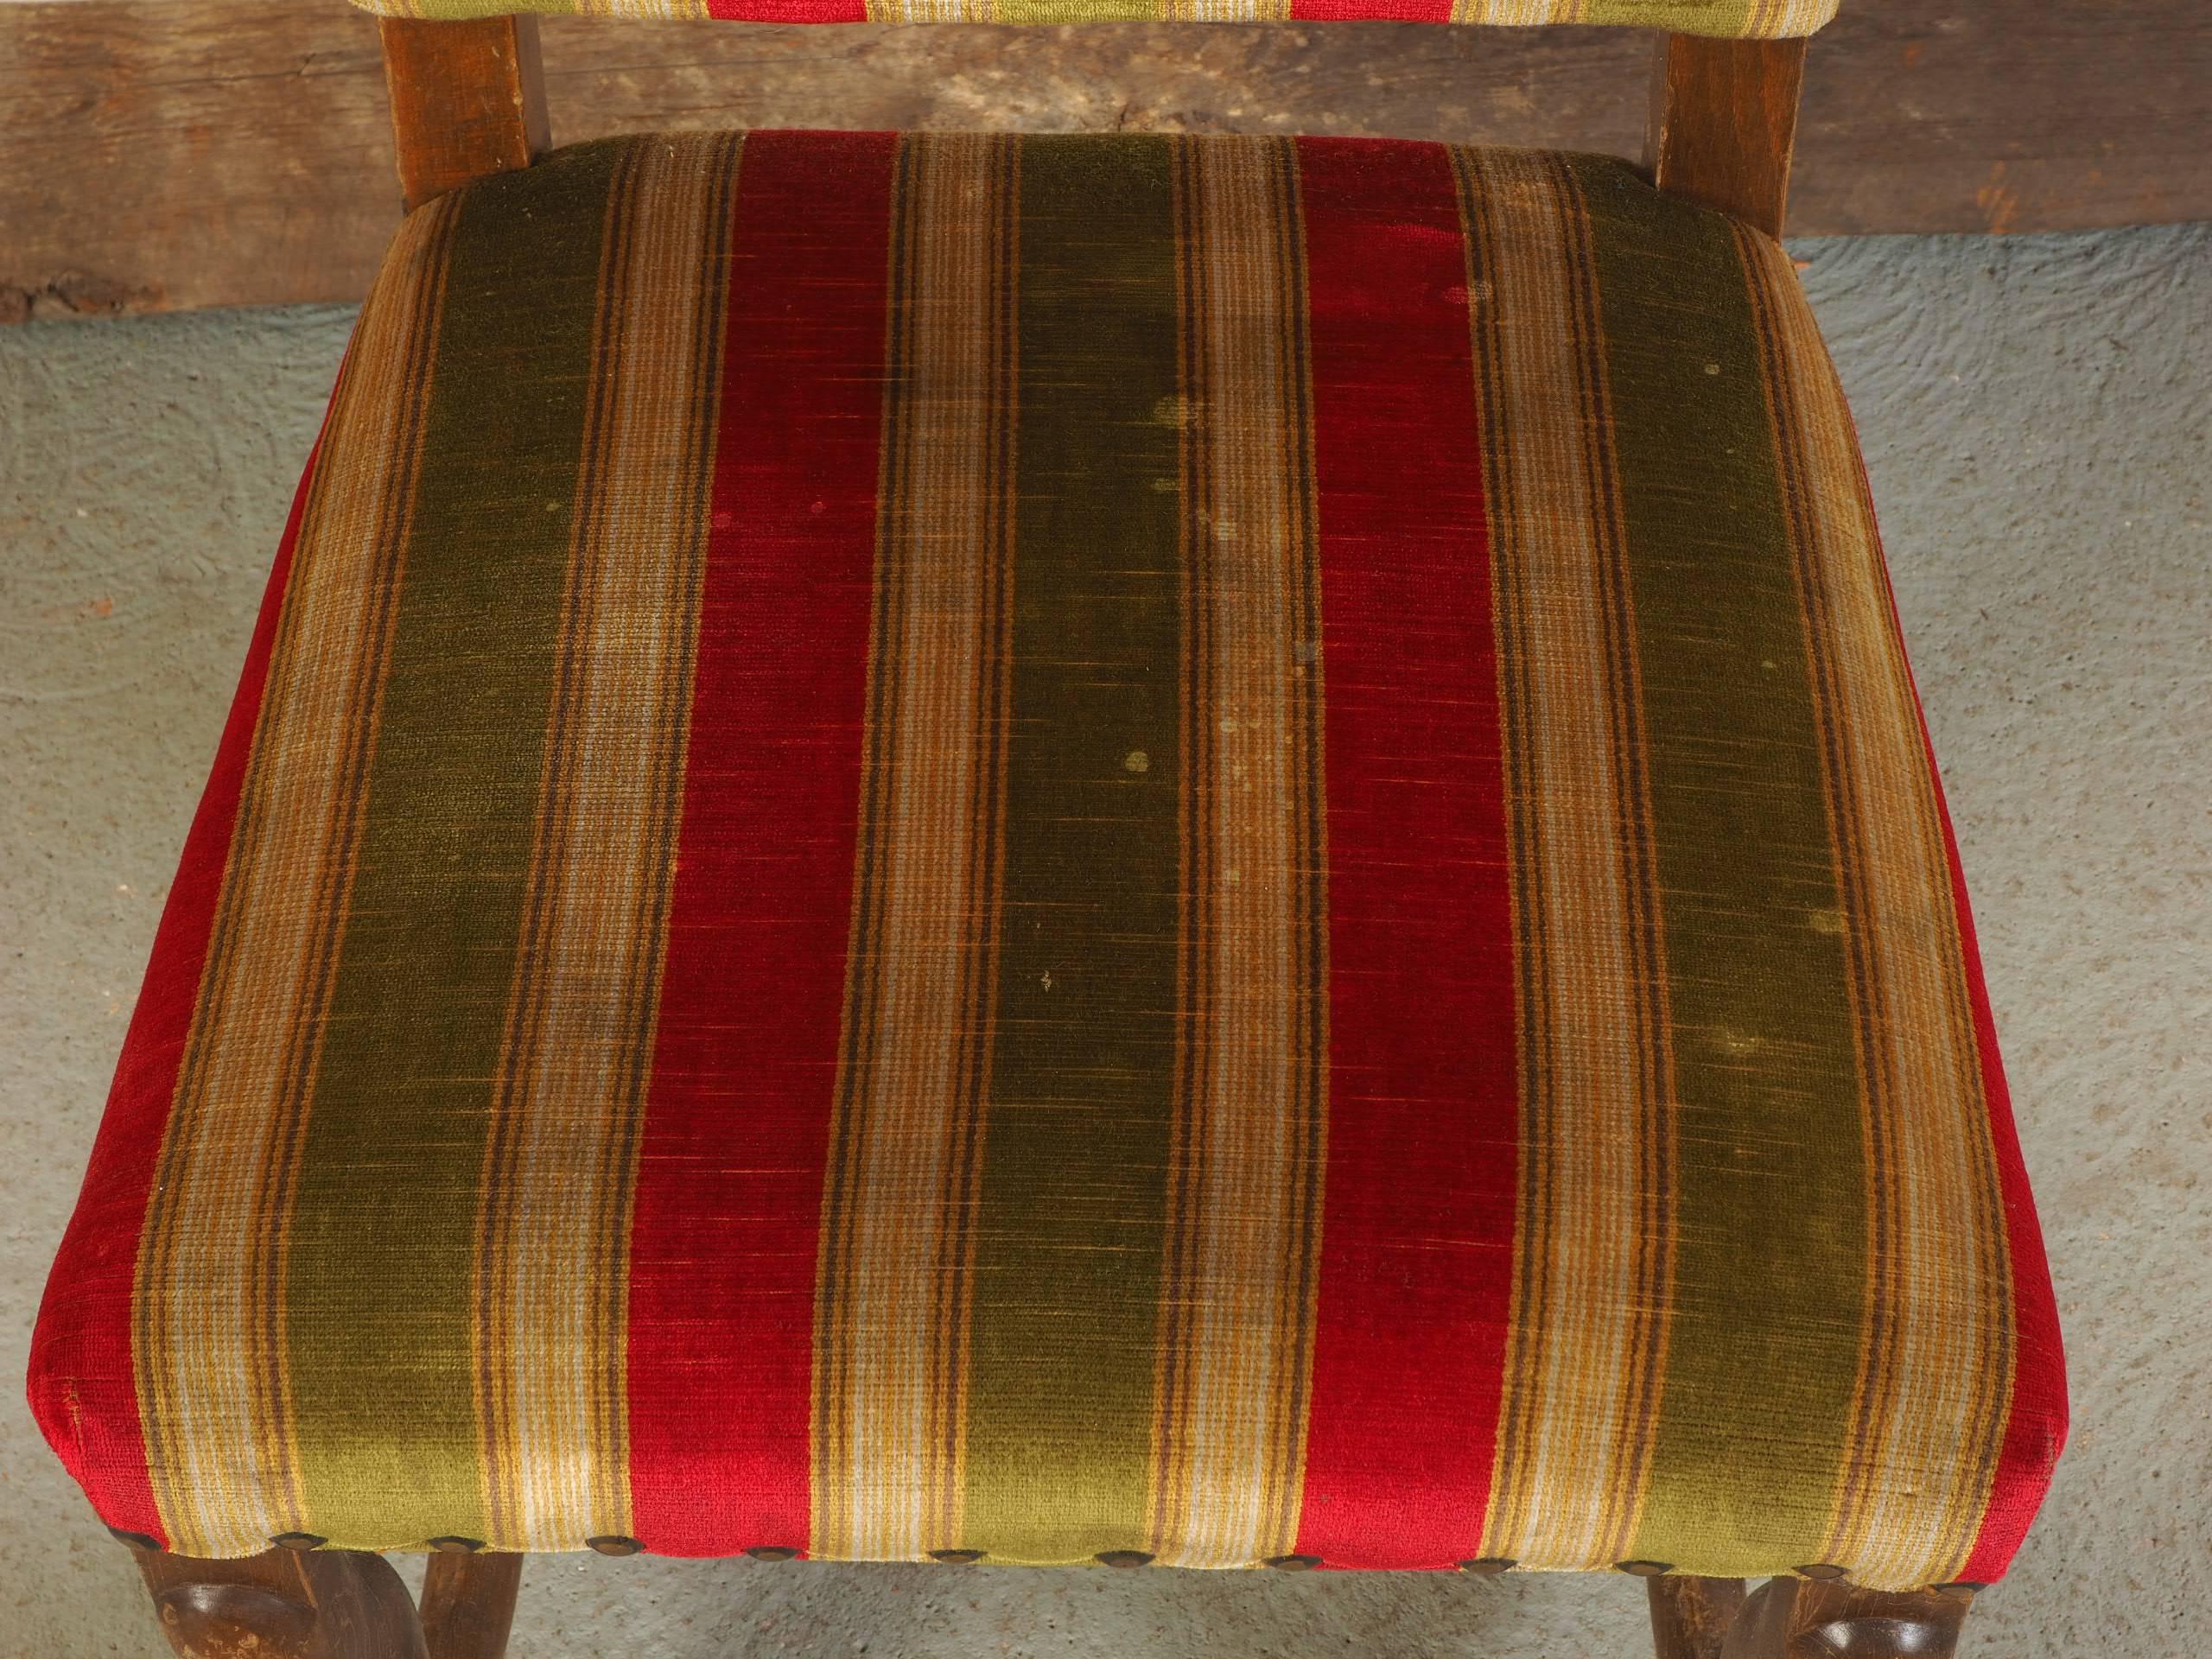 Feature solid walnut frames upholstered in a plush red and green striped fabric and nail head trim. Legs show wear and scratches, and the upholstery is a bit dry and exhibits overall light staining.